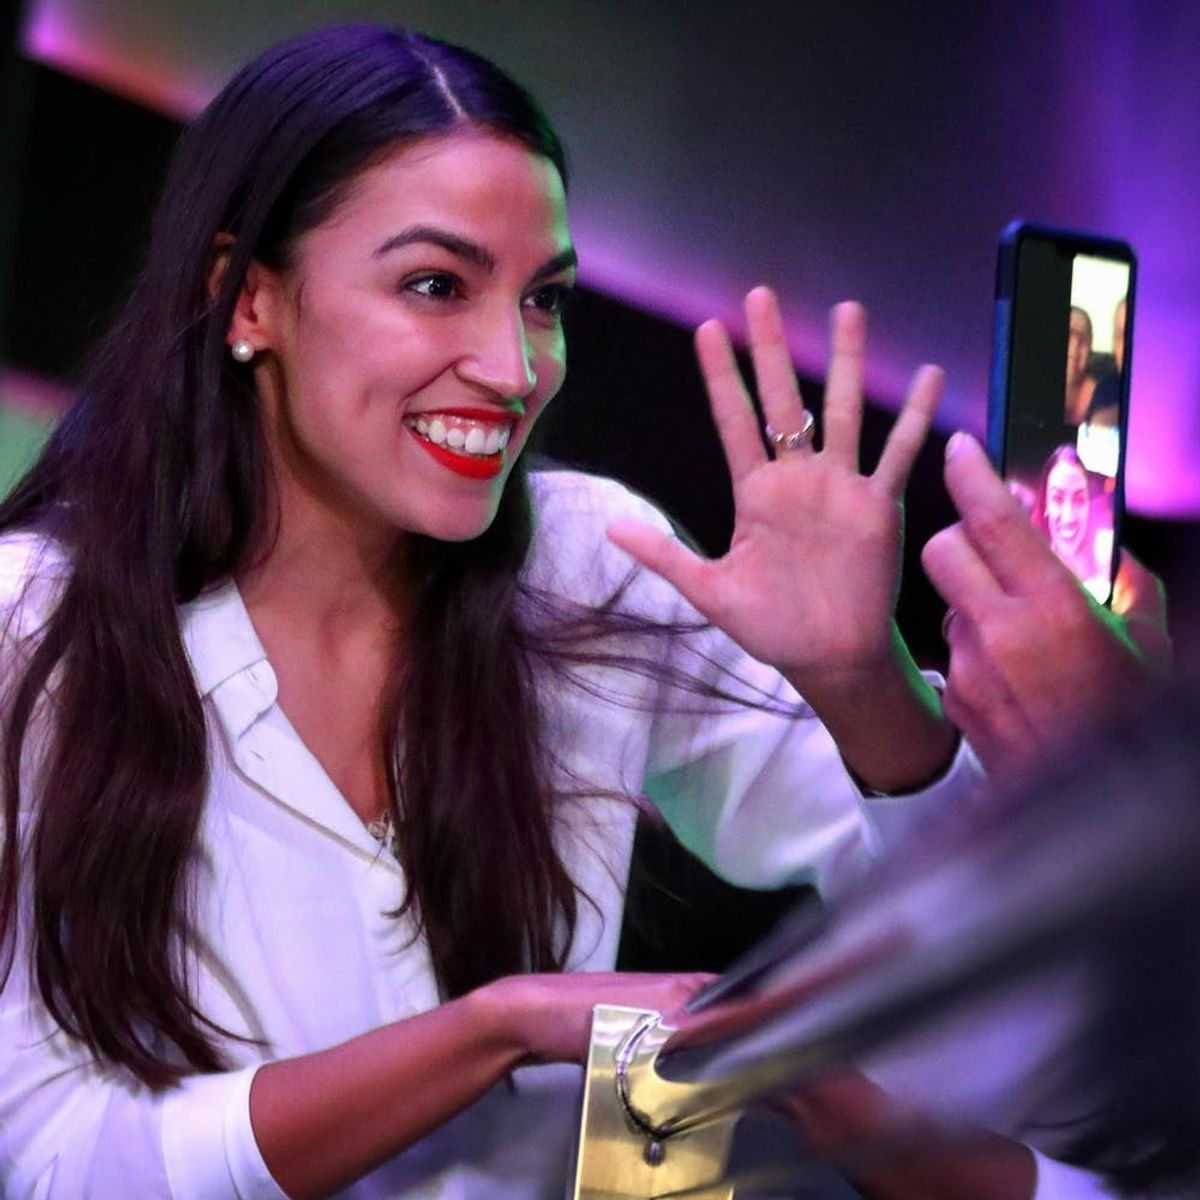 Alexandria Ocasio-Cortez Is Using Her Instagram to Give Us the Civics Lessons We Didn’t Know We Needed